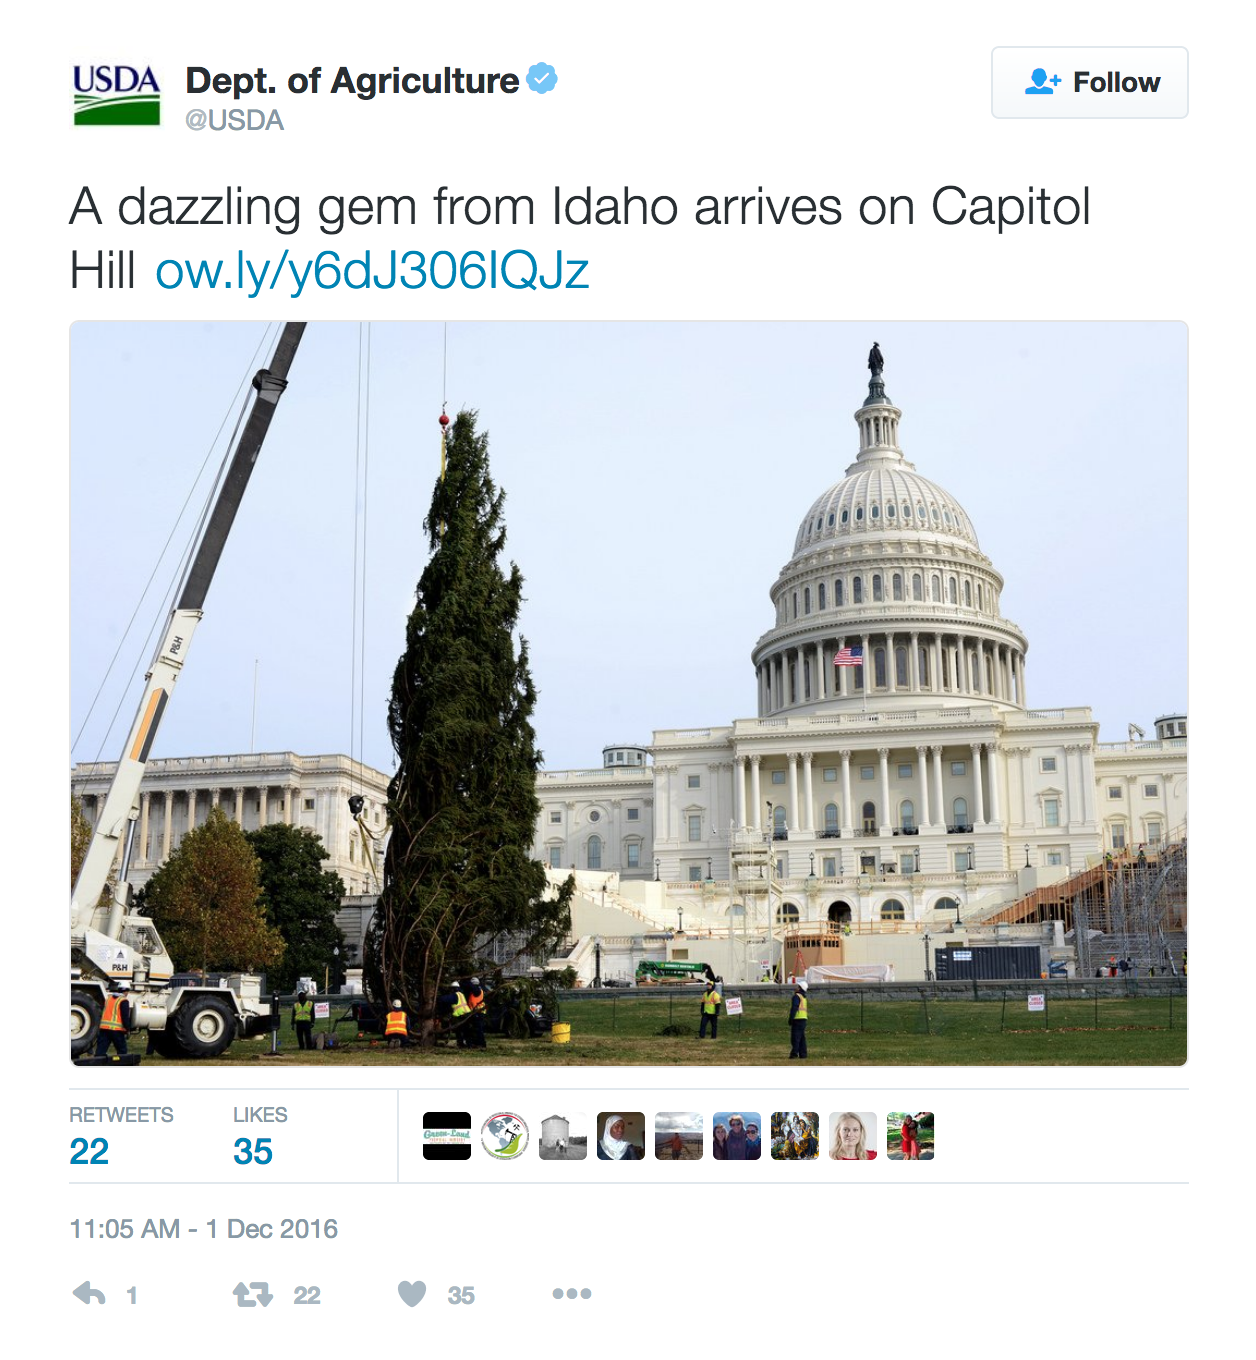 A dazzling gem from Idaho arrives on Capitol Hill http://ow.ly/y6dJ306IQJz 